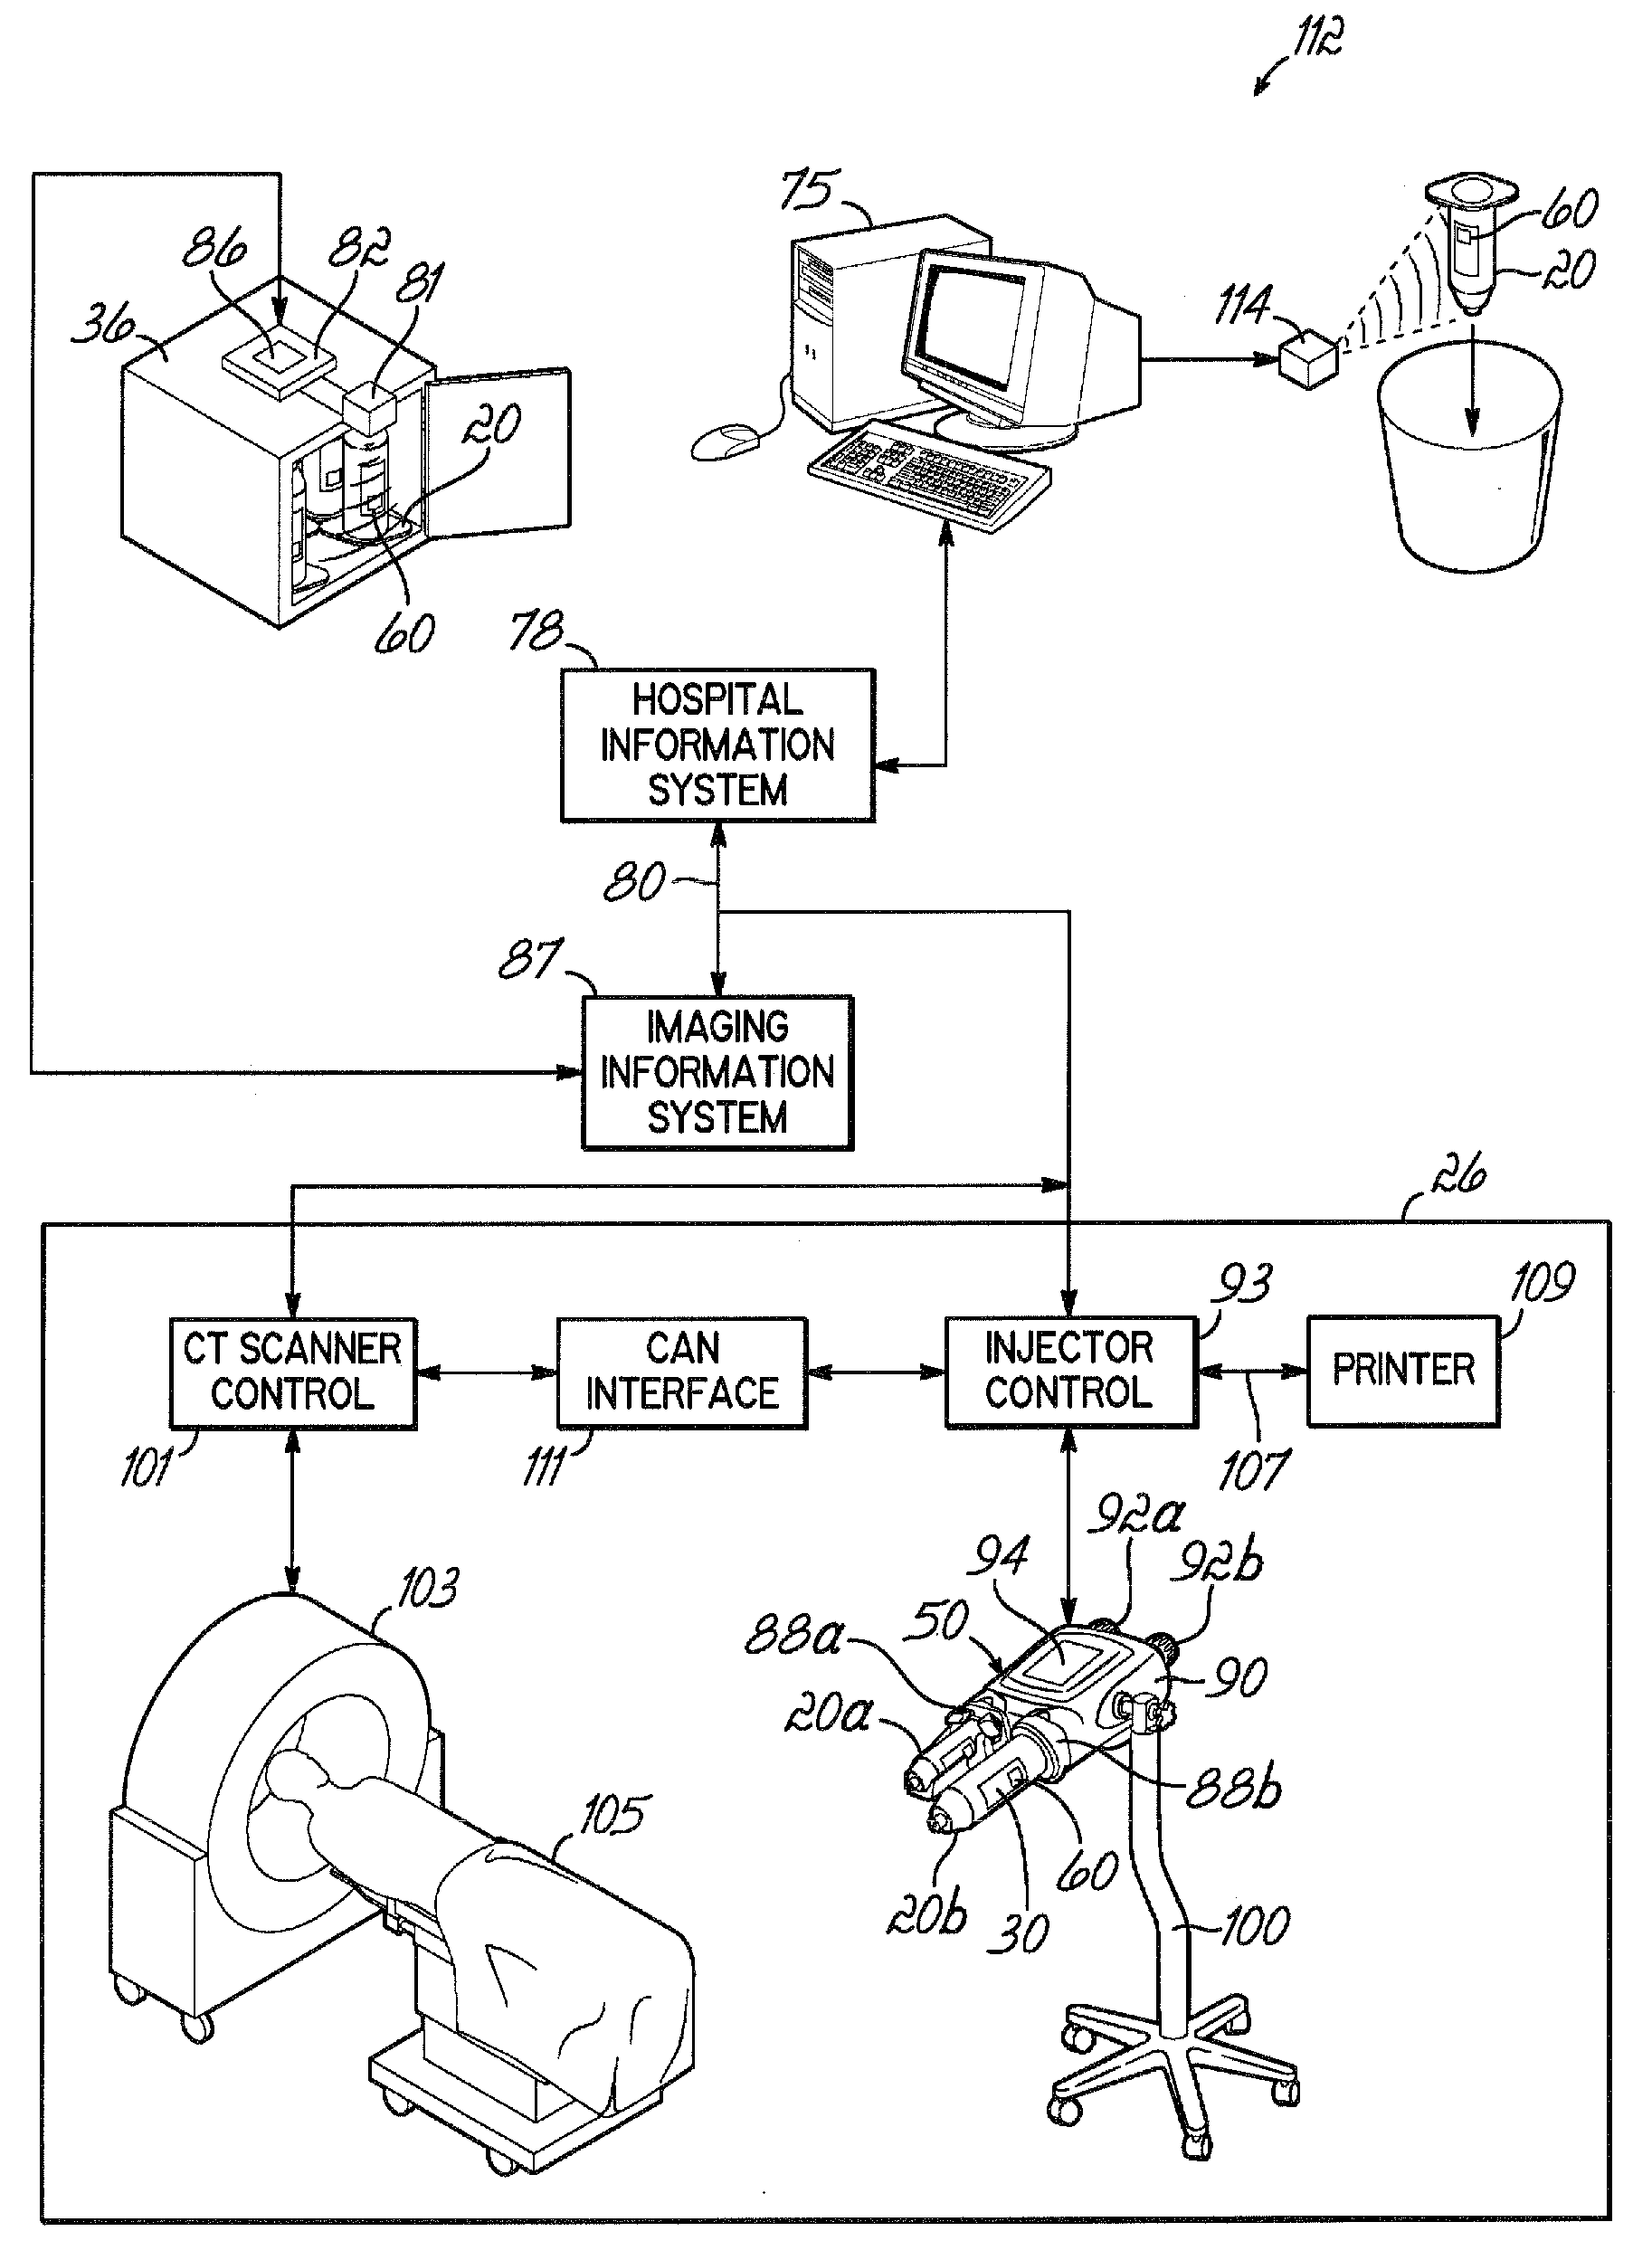 Systems and methods for managing information relating to medical fluids and containers therefor